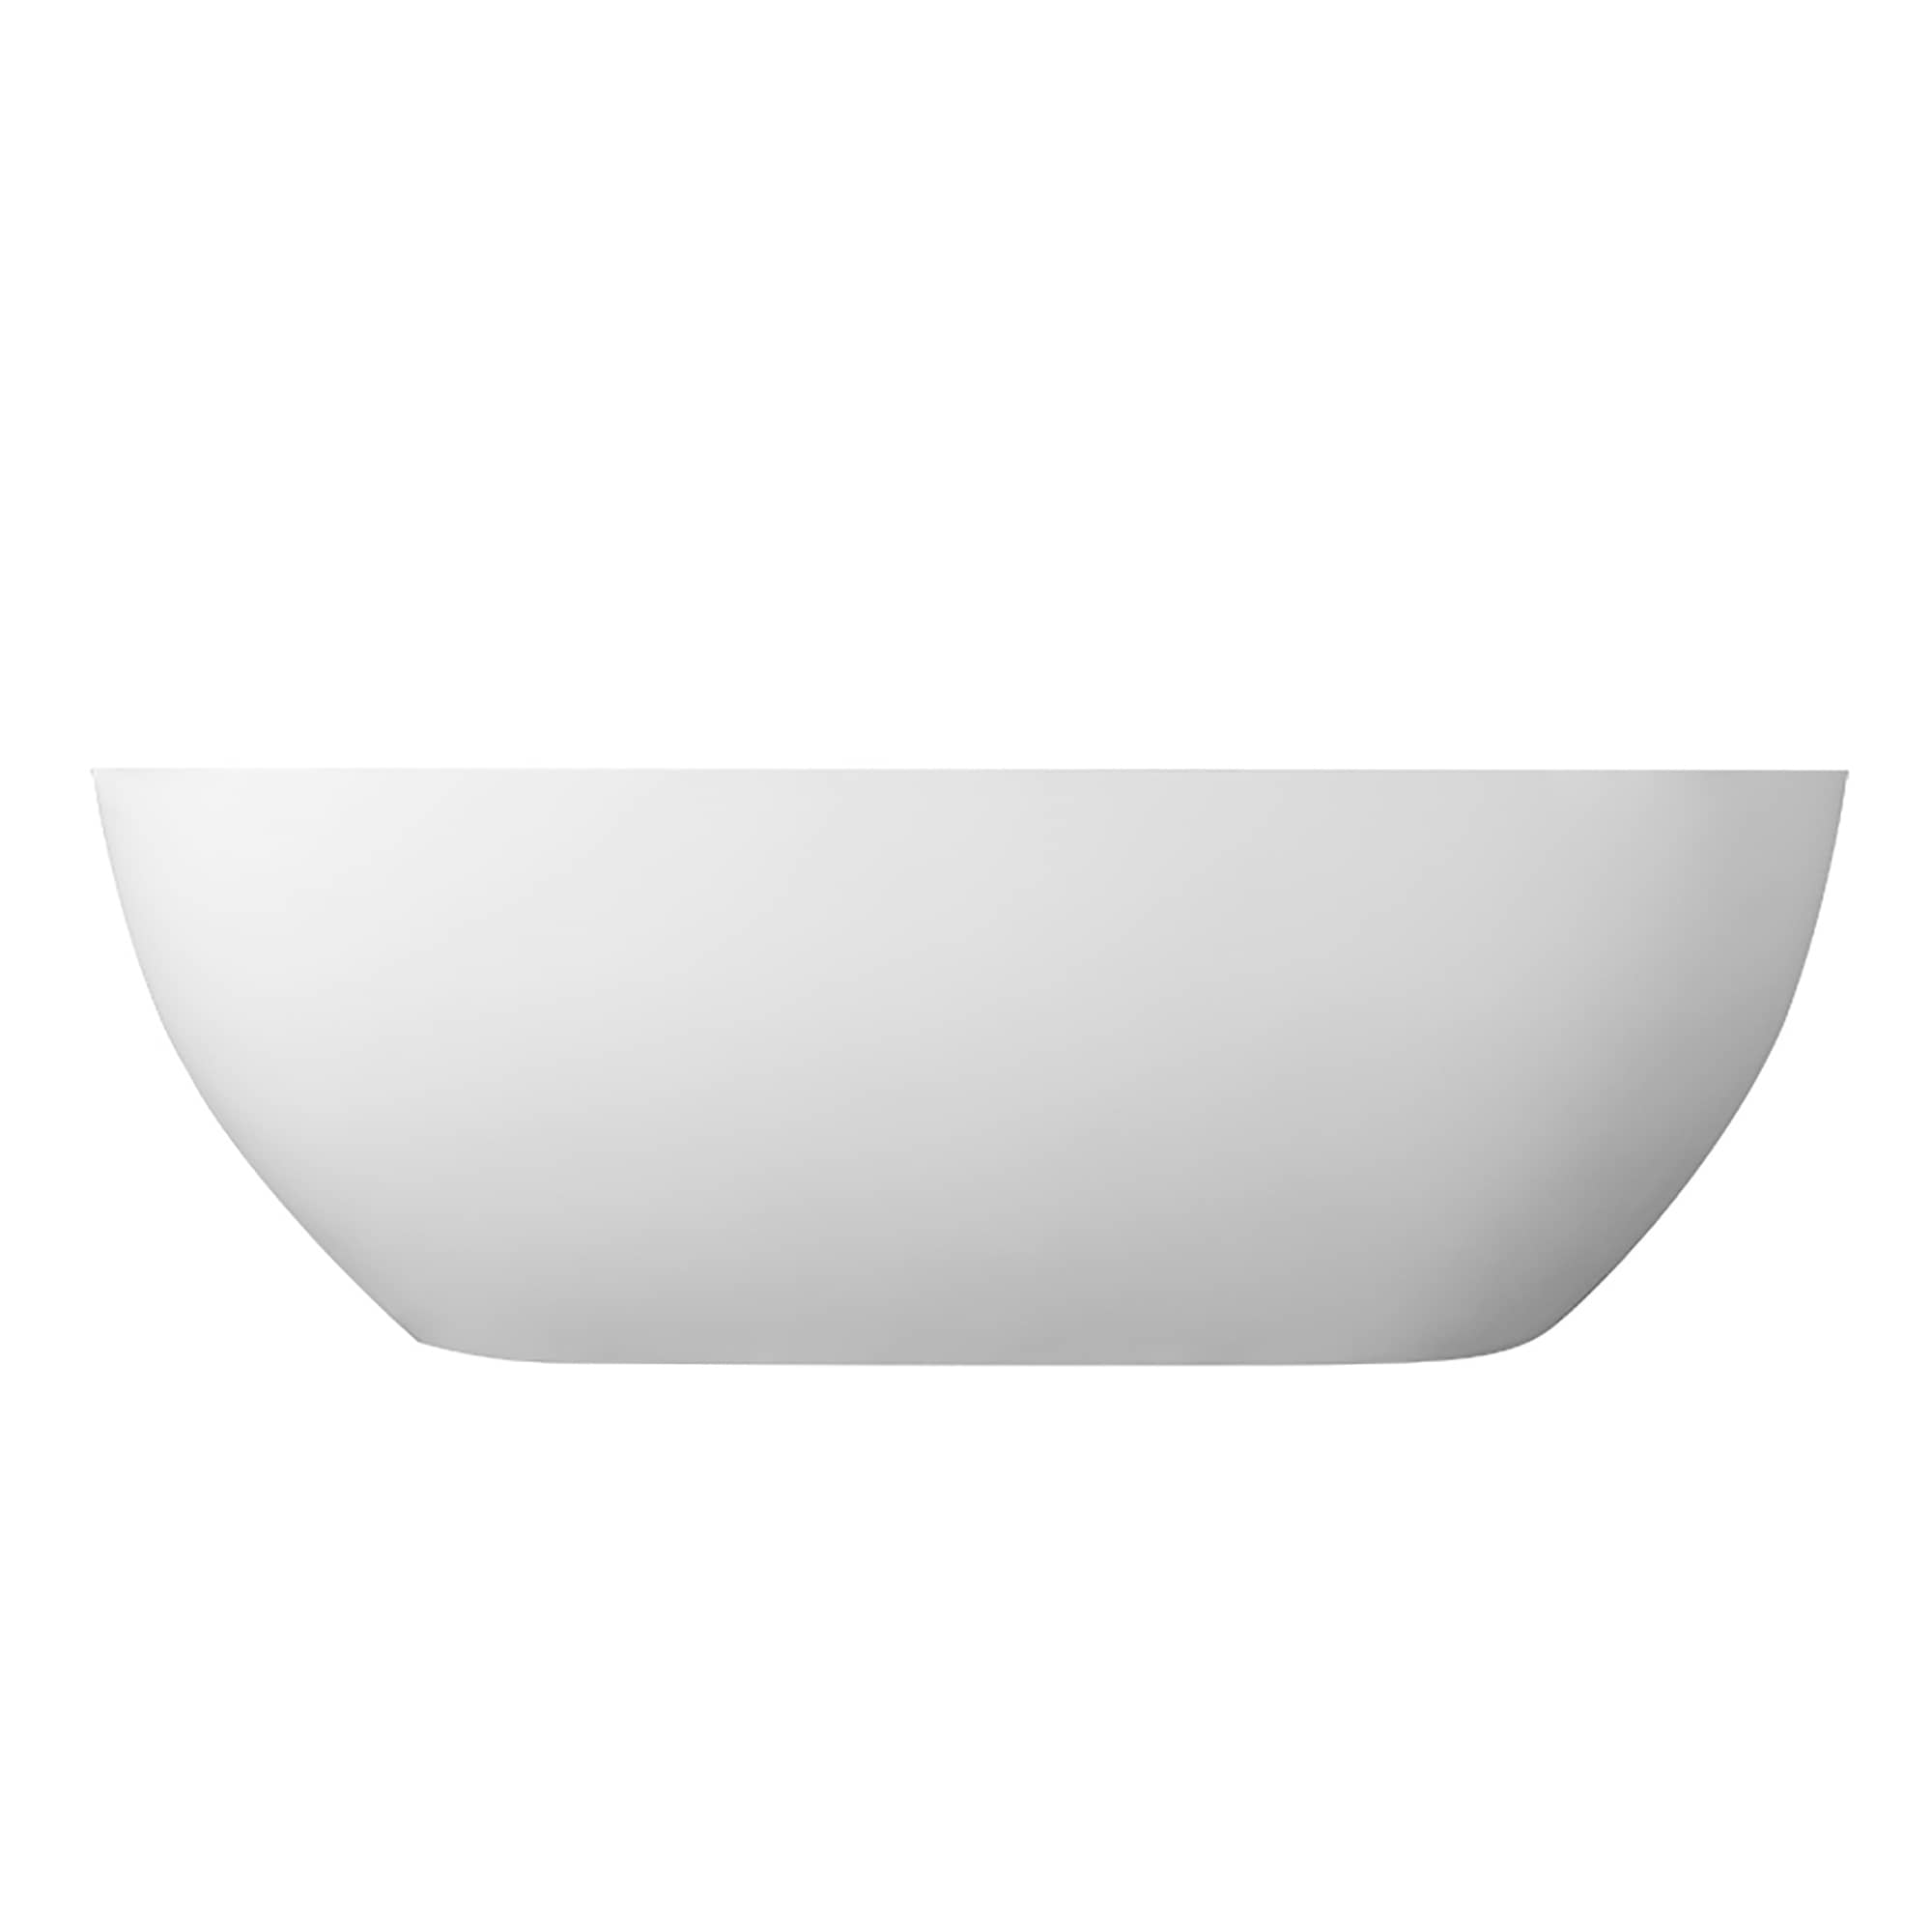 CASAINC 69 in. Solid Surface Free-Standing Bathtub with Centre Drain in Matte White